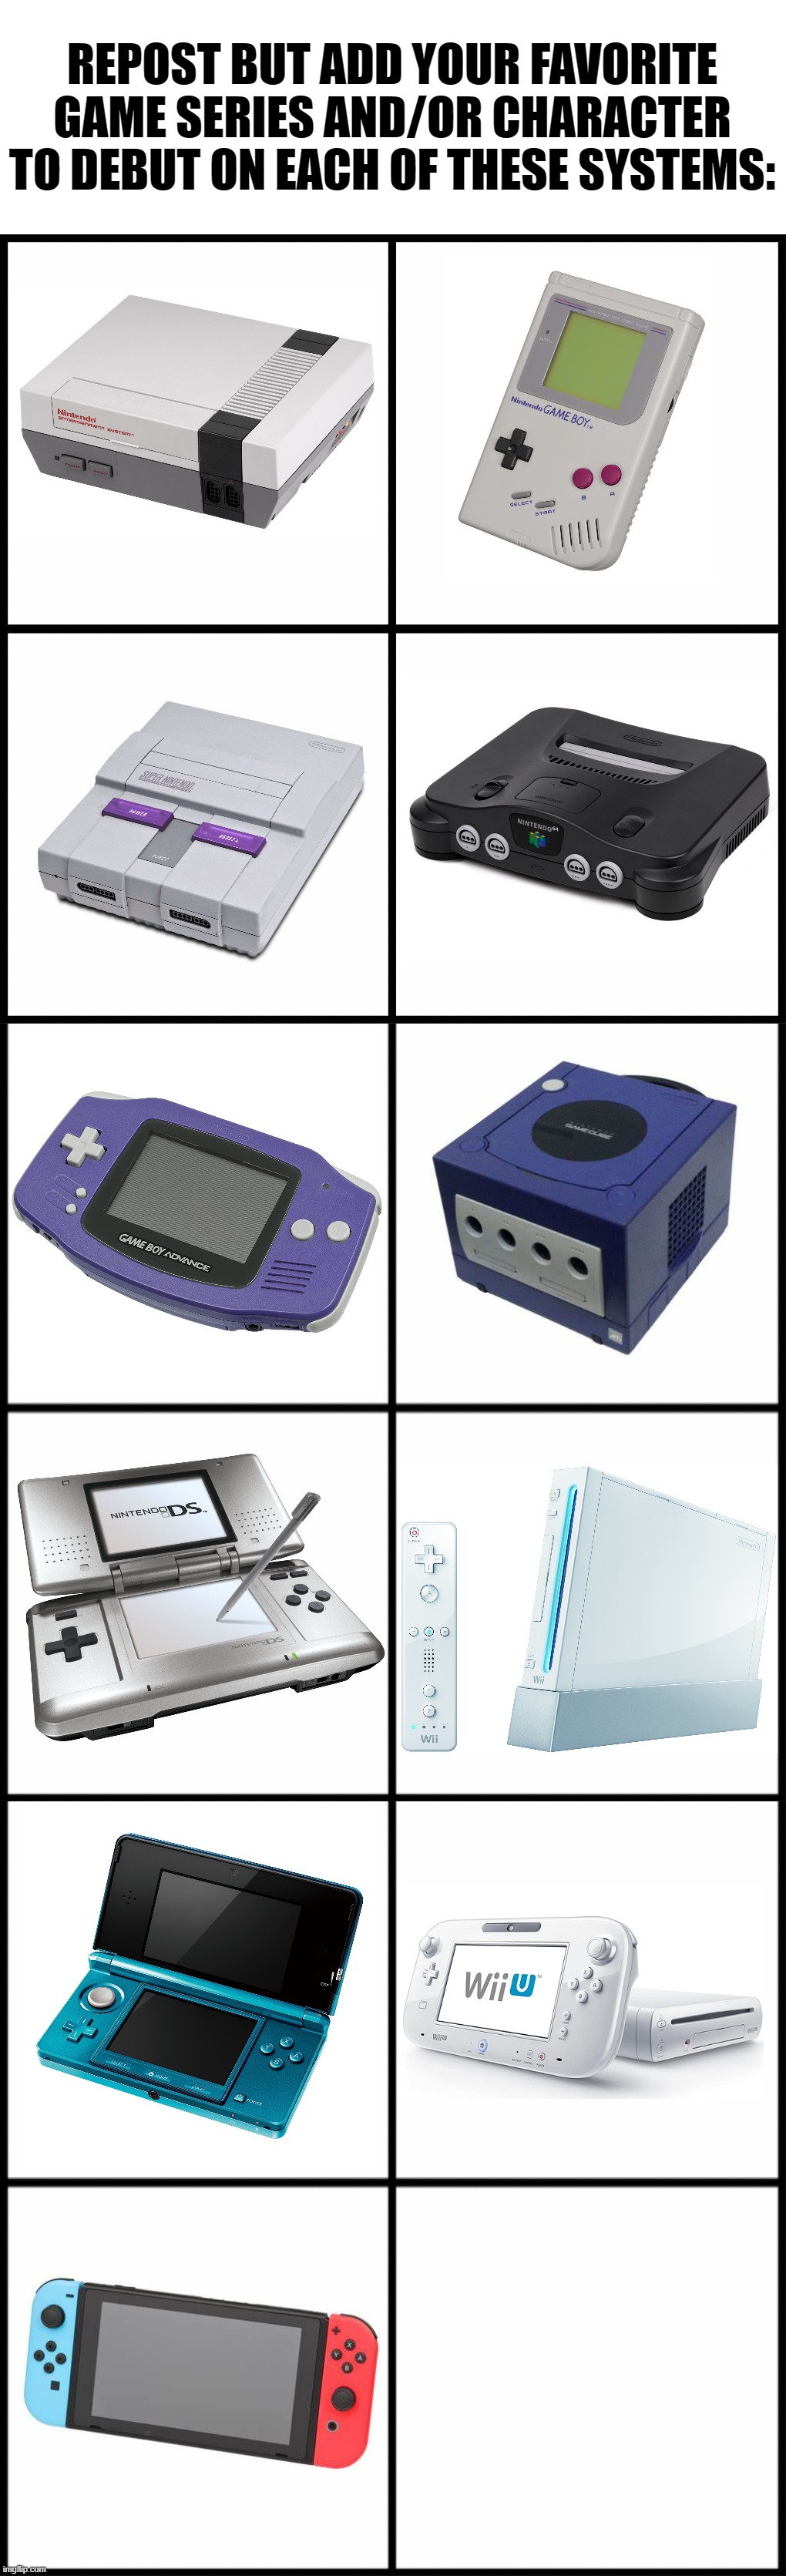 REPOST BUT ADD YOUR FAVORITE GAME SERIES AND/OR CHARACTER TO DEBUT ON EACH OF THESE SYSTEMS: | image tagged in blank drake format | made w/ Imgflip meme maker